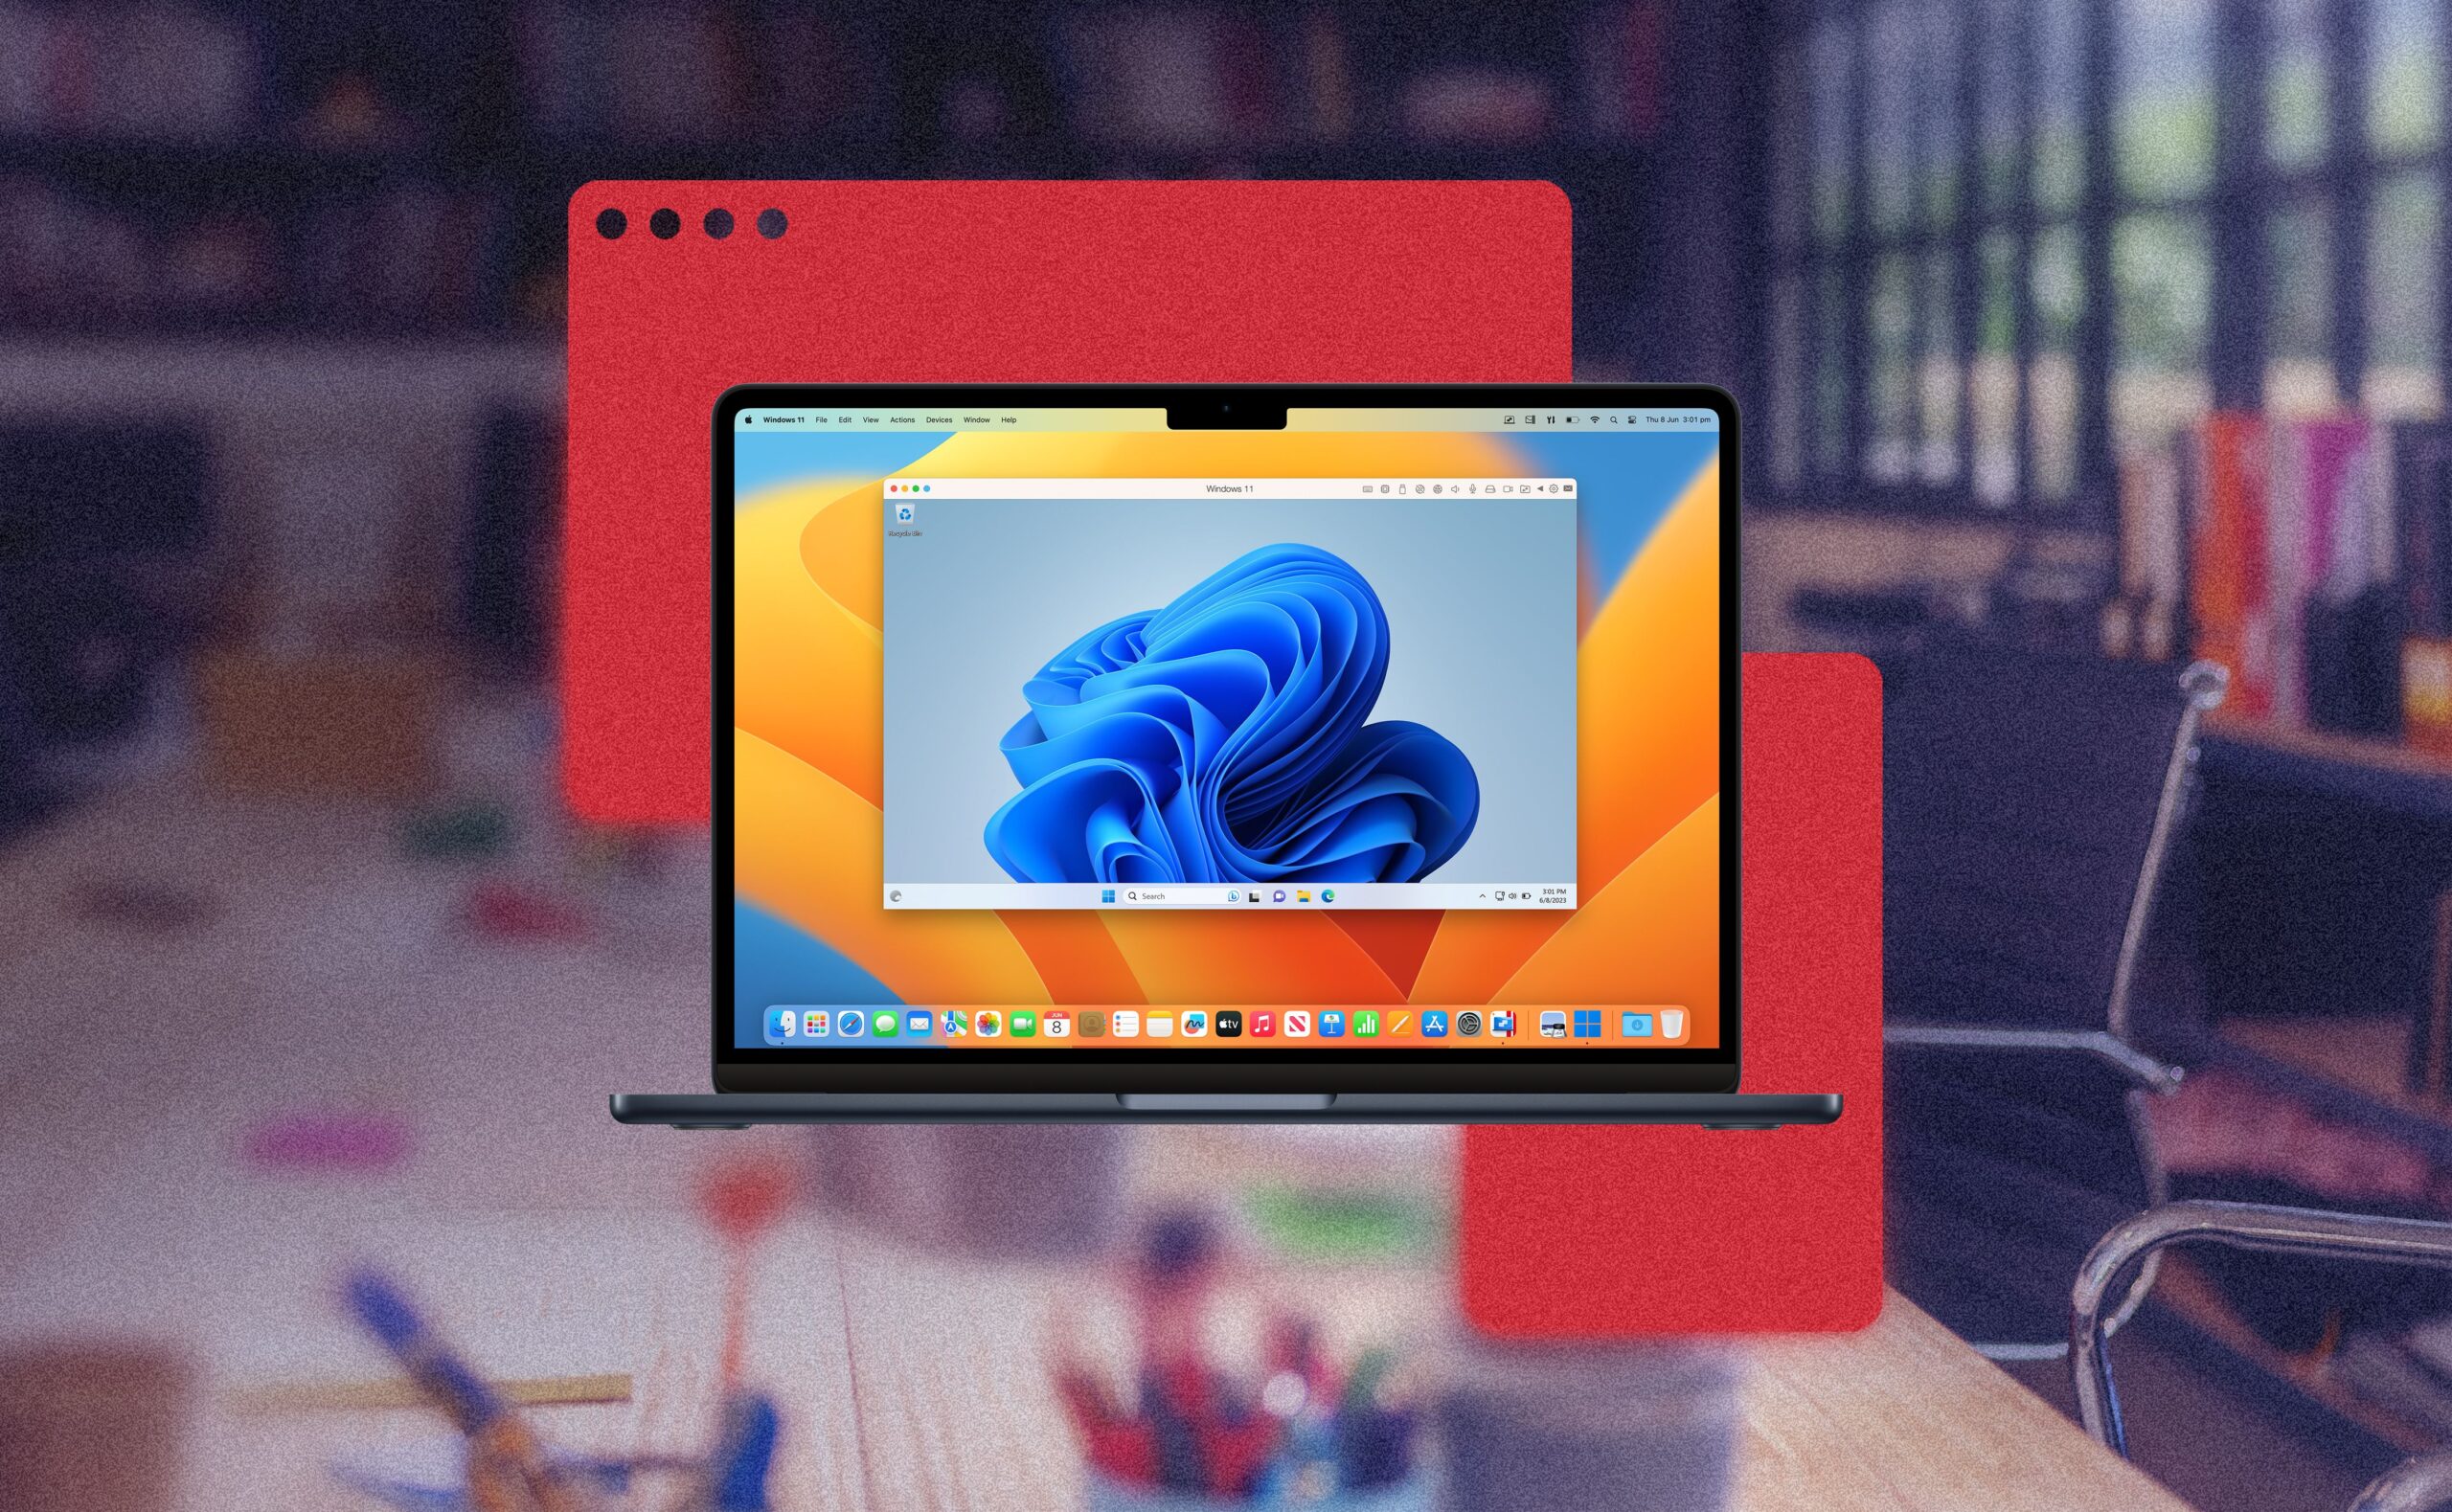 Parallels Desktop 19 arrives with x86 support on Linux, Touch ID, and more